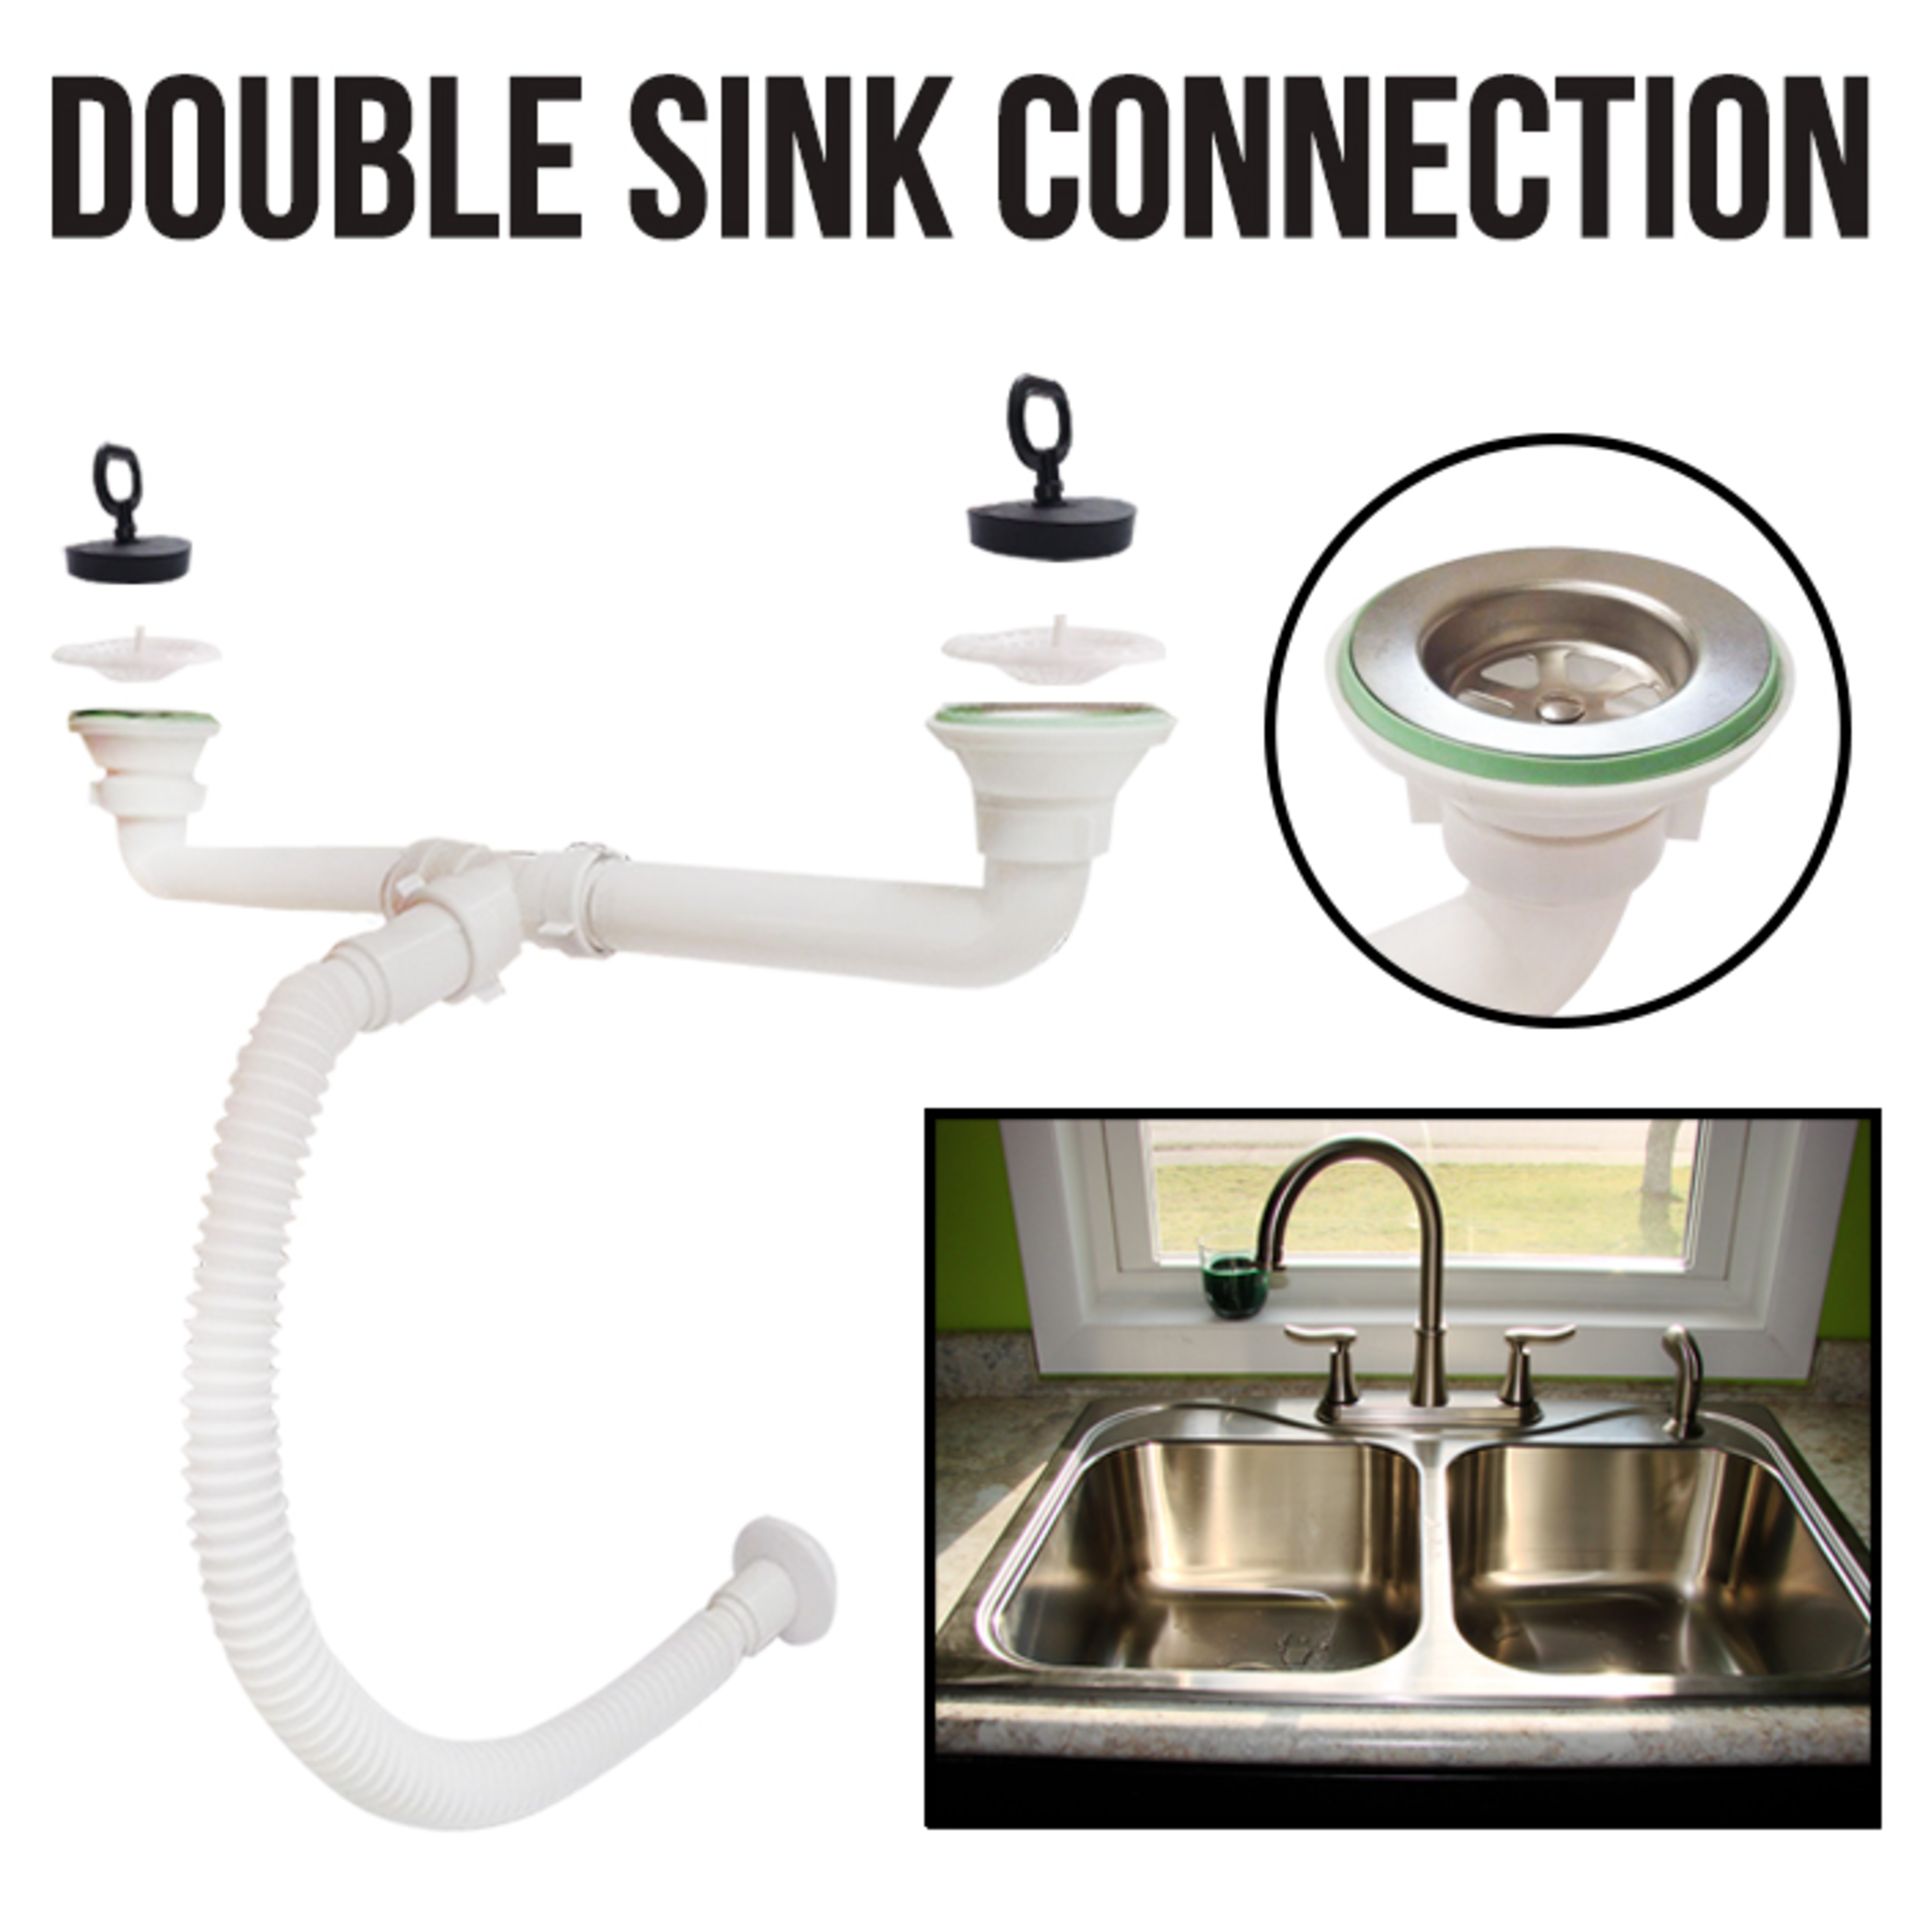 Double Drainer Waste Kit White Colour PVC Under Sink Drainage Set - A MUST KEEP ITEM in Tool